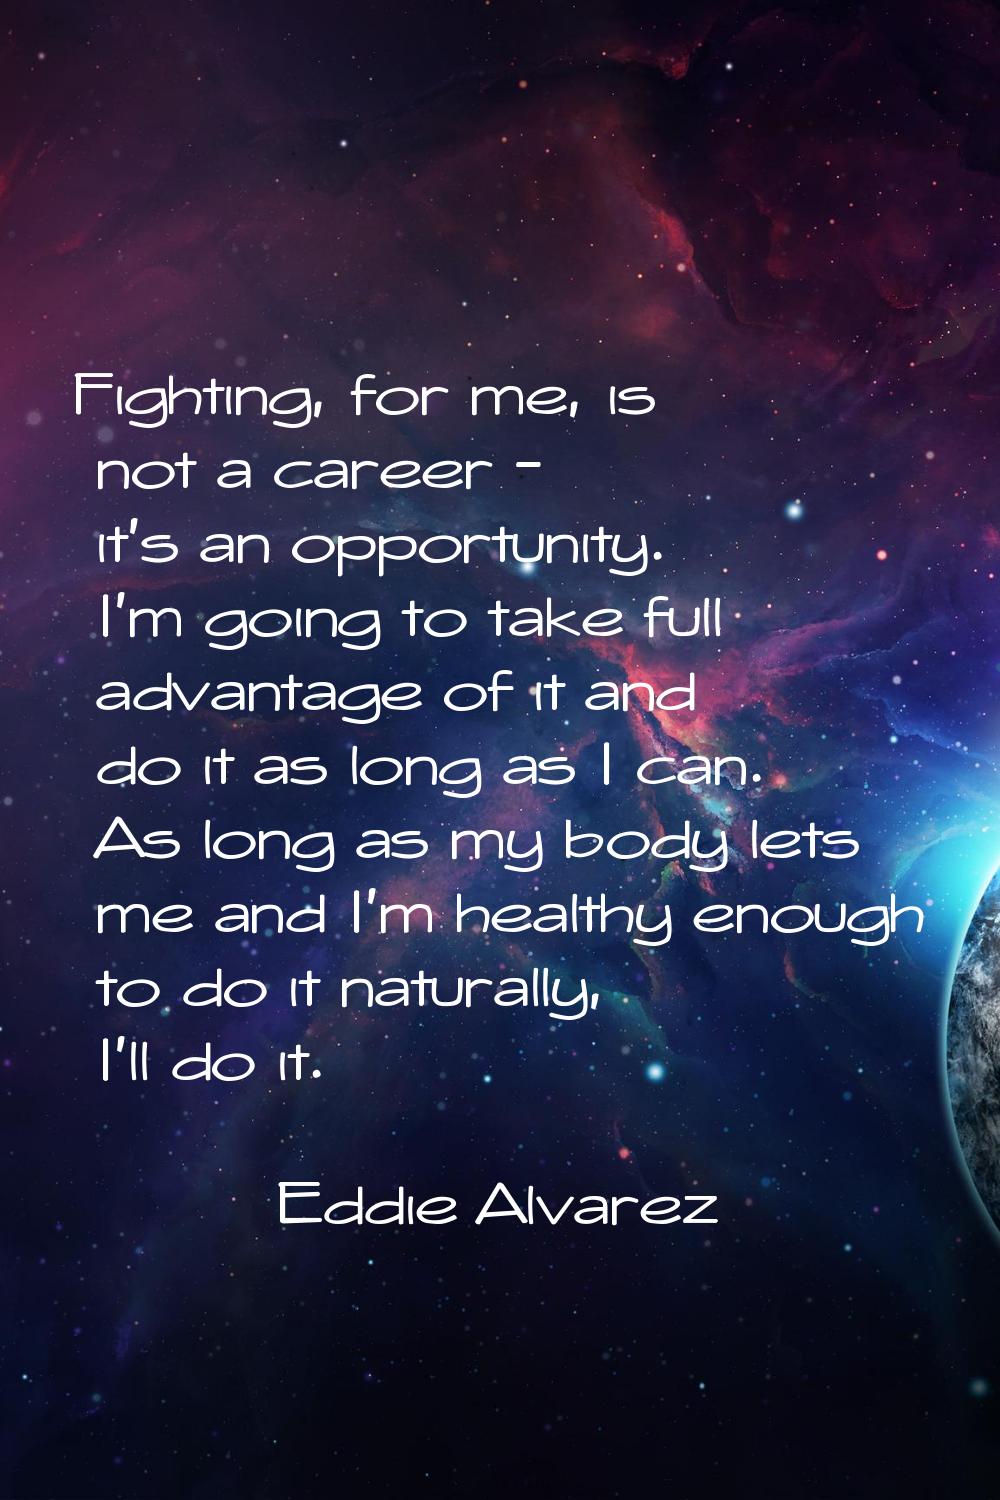 Fighting, for me, is not a career - it's an opportunity. I'm going to take full advantage of it and